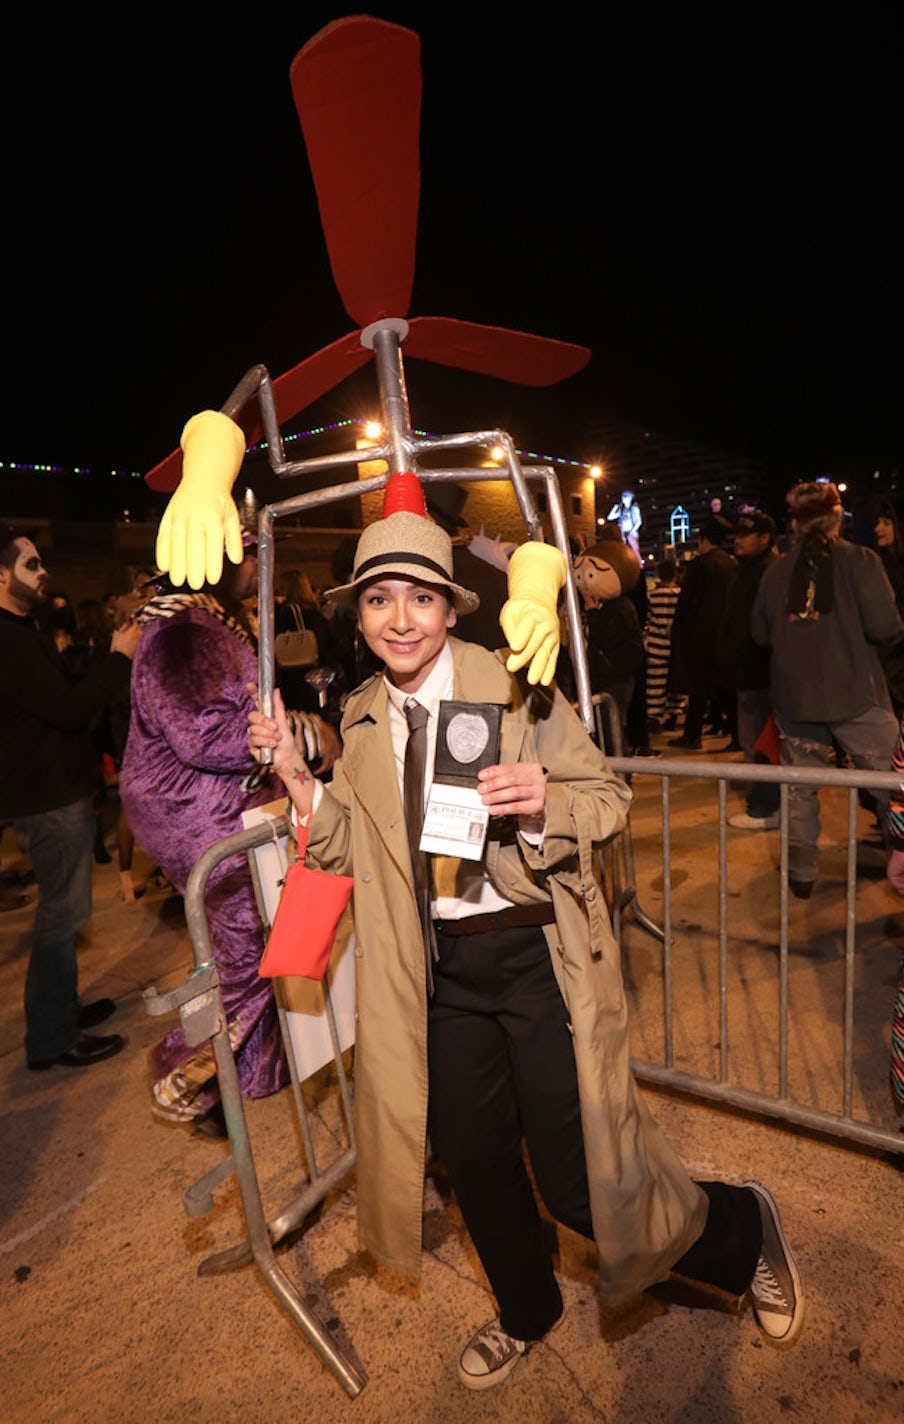 12 amazing costumes from the Oak Lawn Halloween Block Party 2017